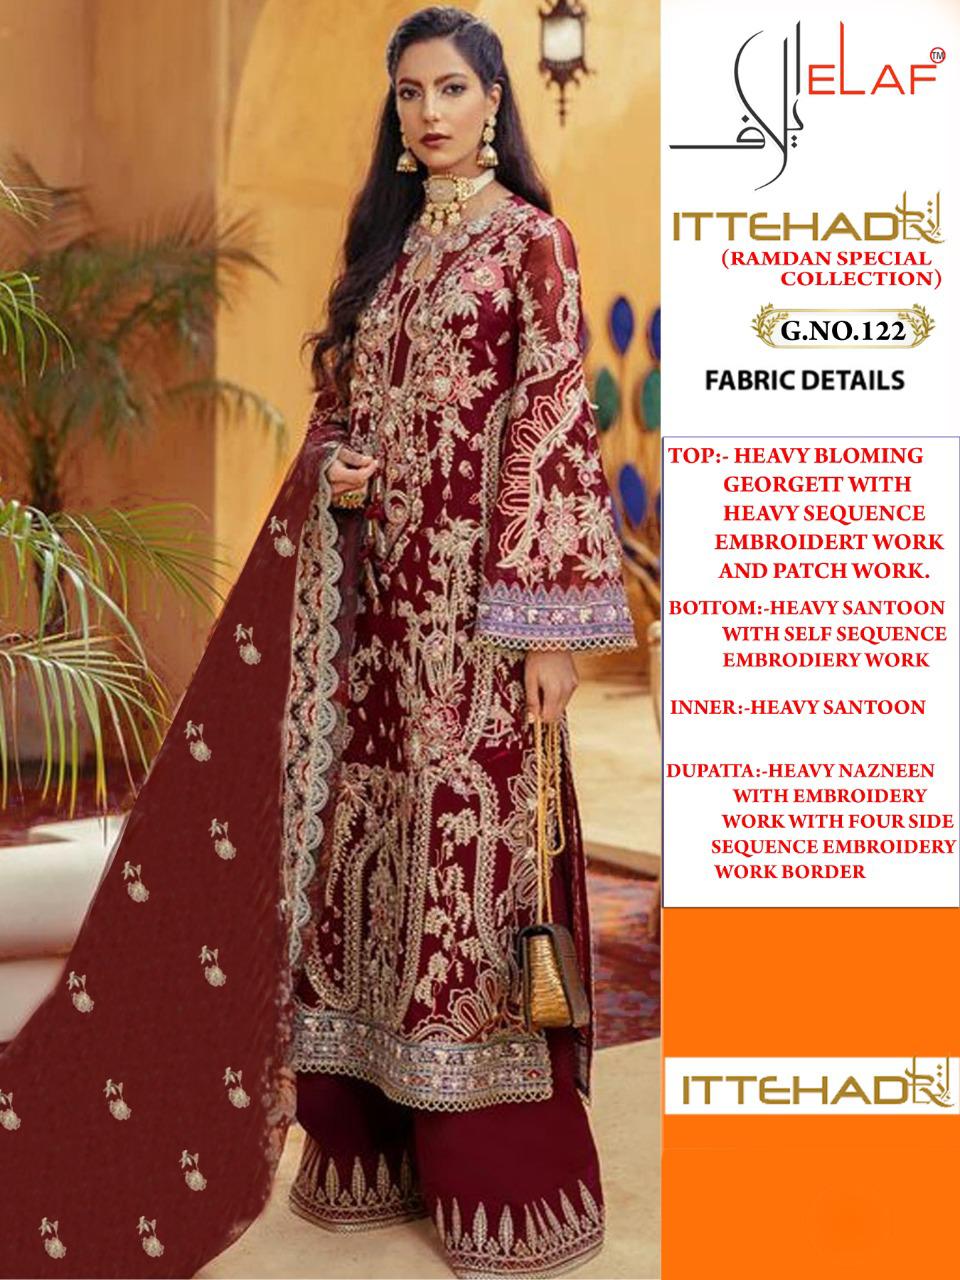 ELAF ITTEHAD 122 RAMDAN SPECIAL COLLECTION AT BEST PRICE